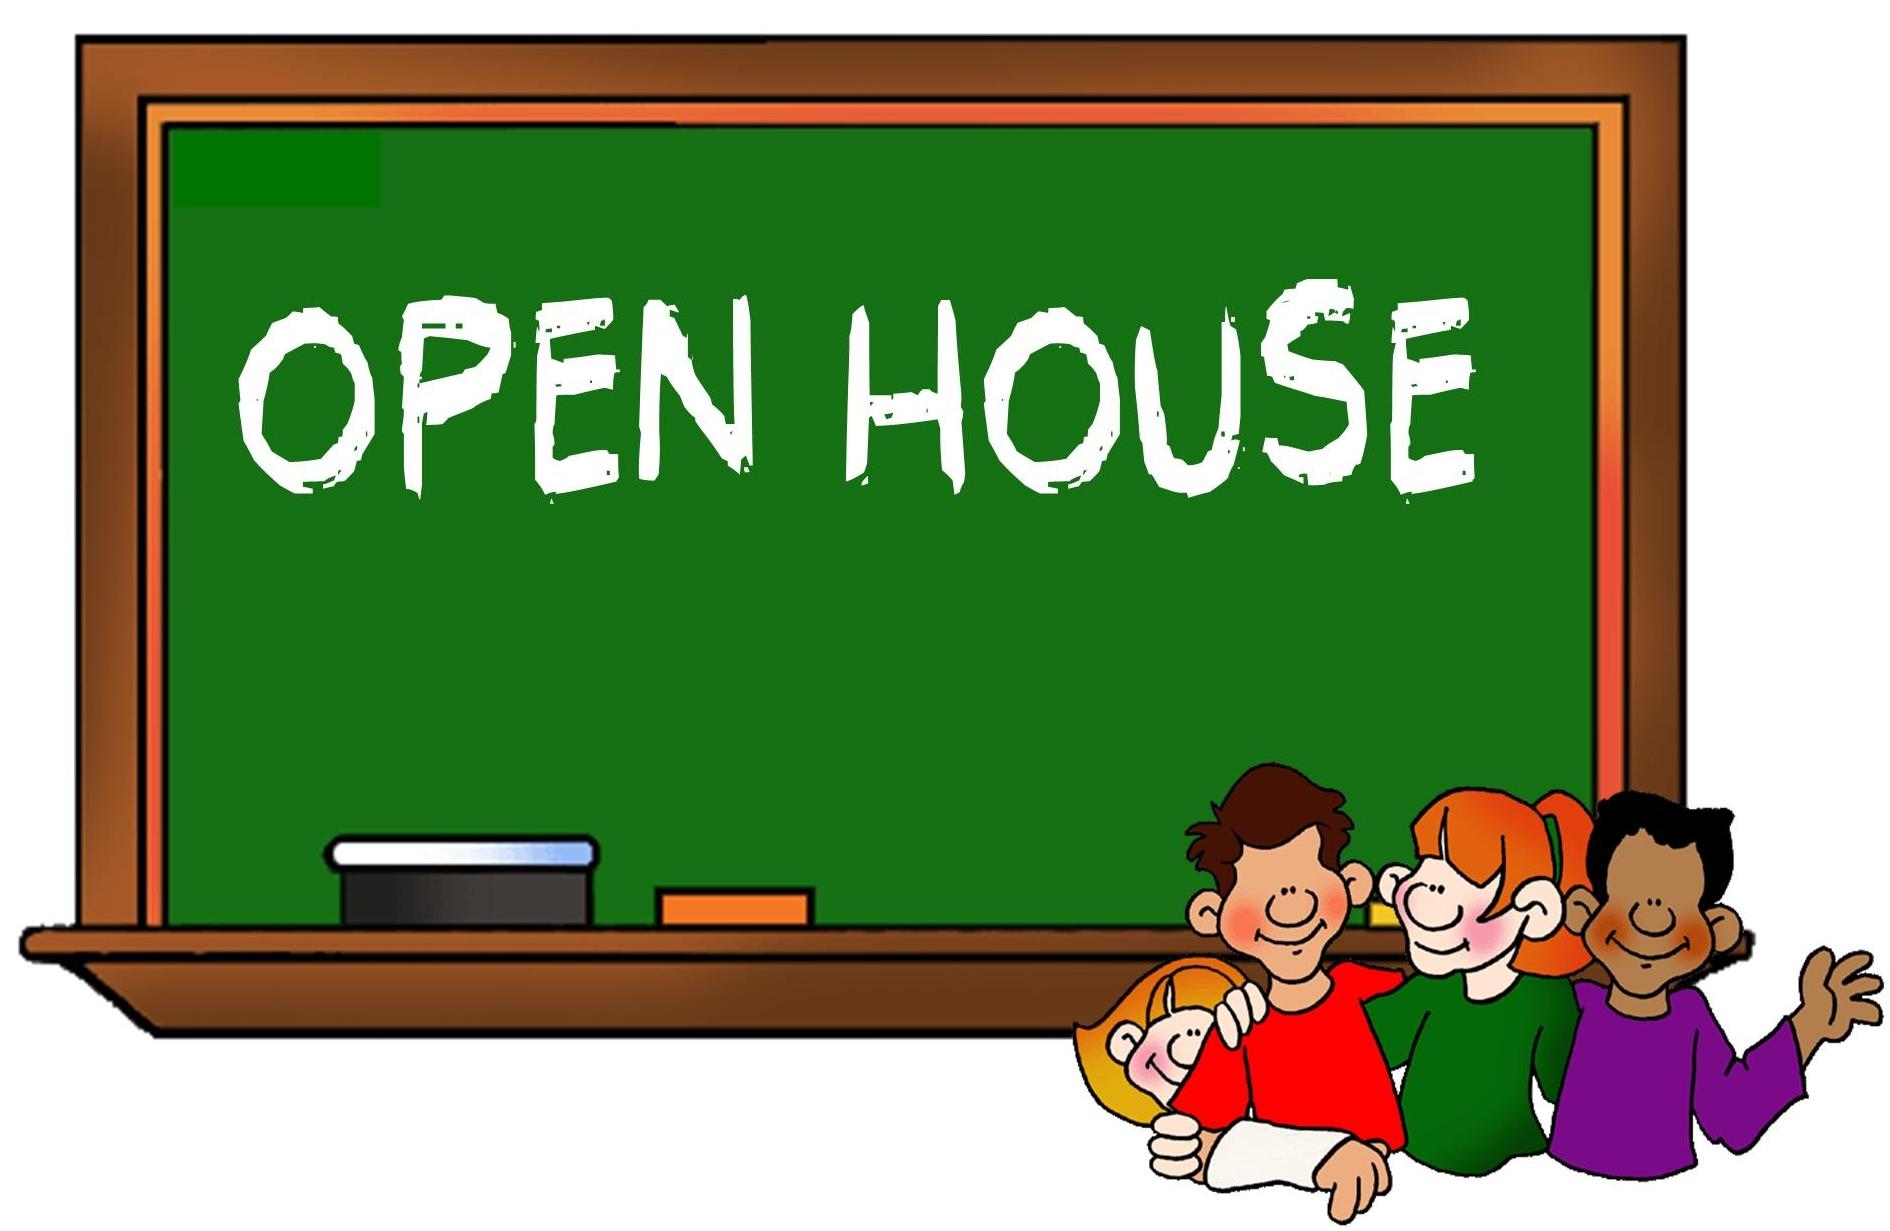 Open house day